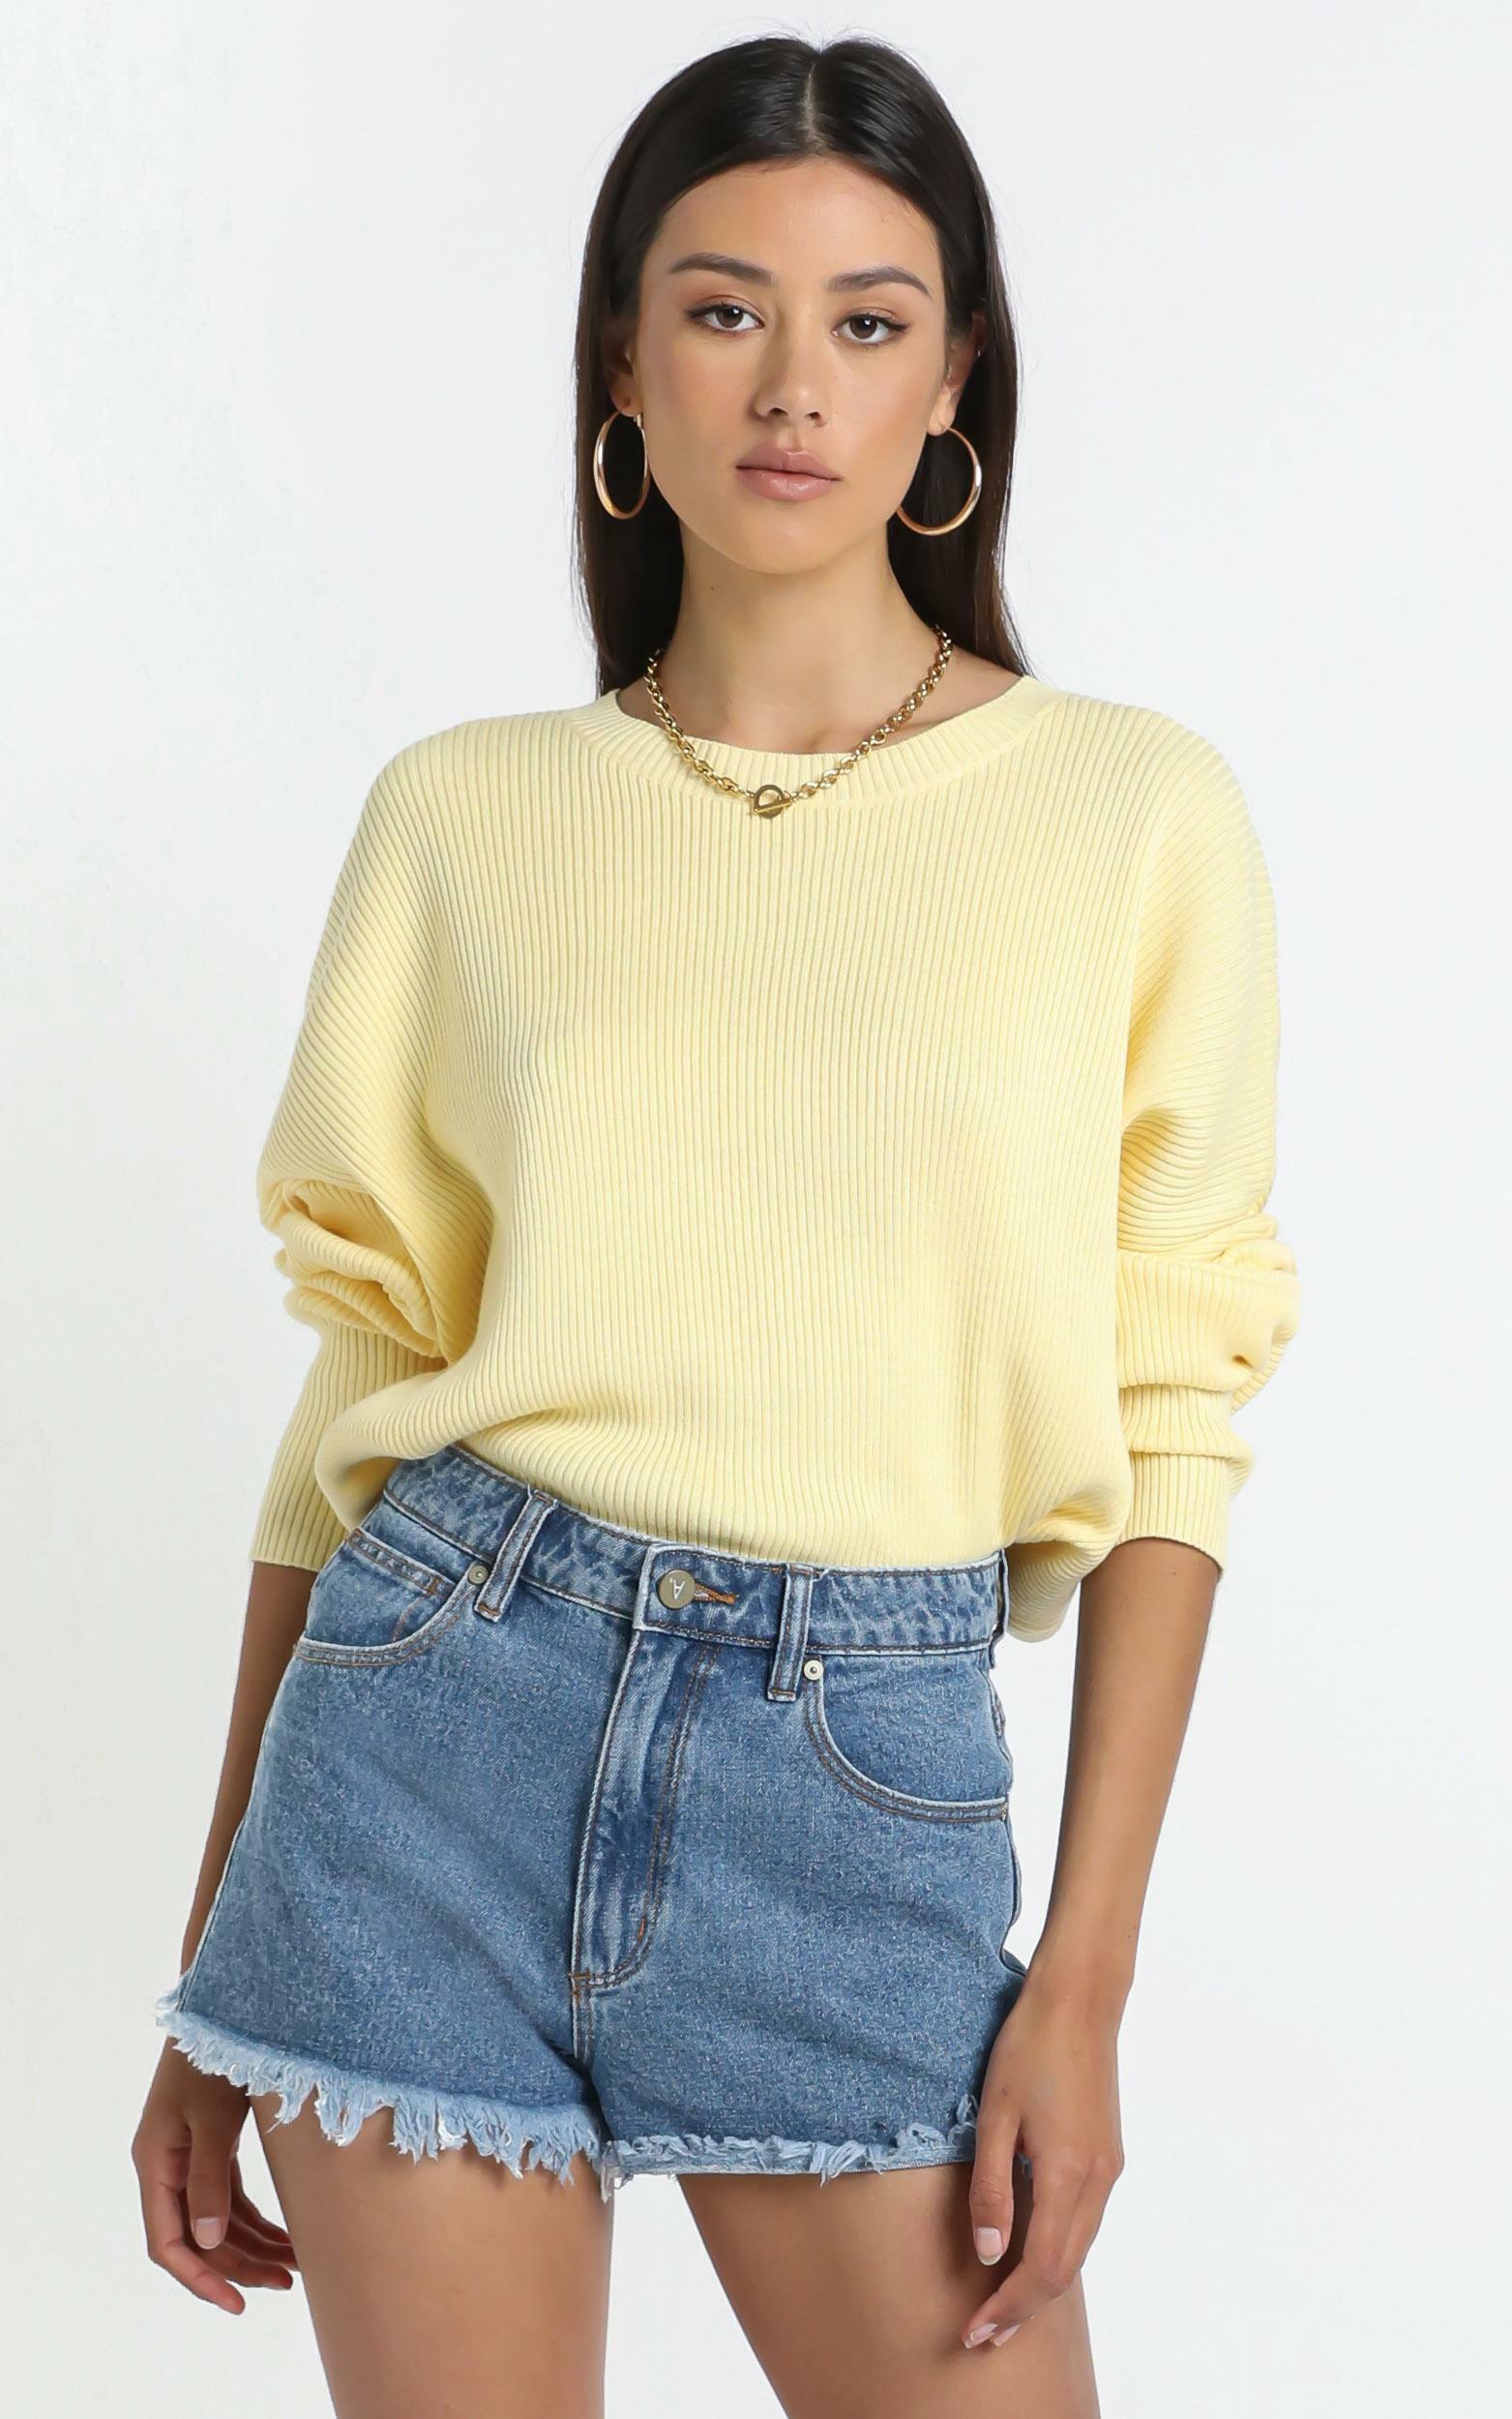 Lullaby Club - Alex Knit Sweater in Lemon - L/XL, Yellow, hi-res image number null